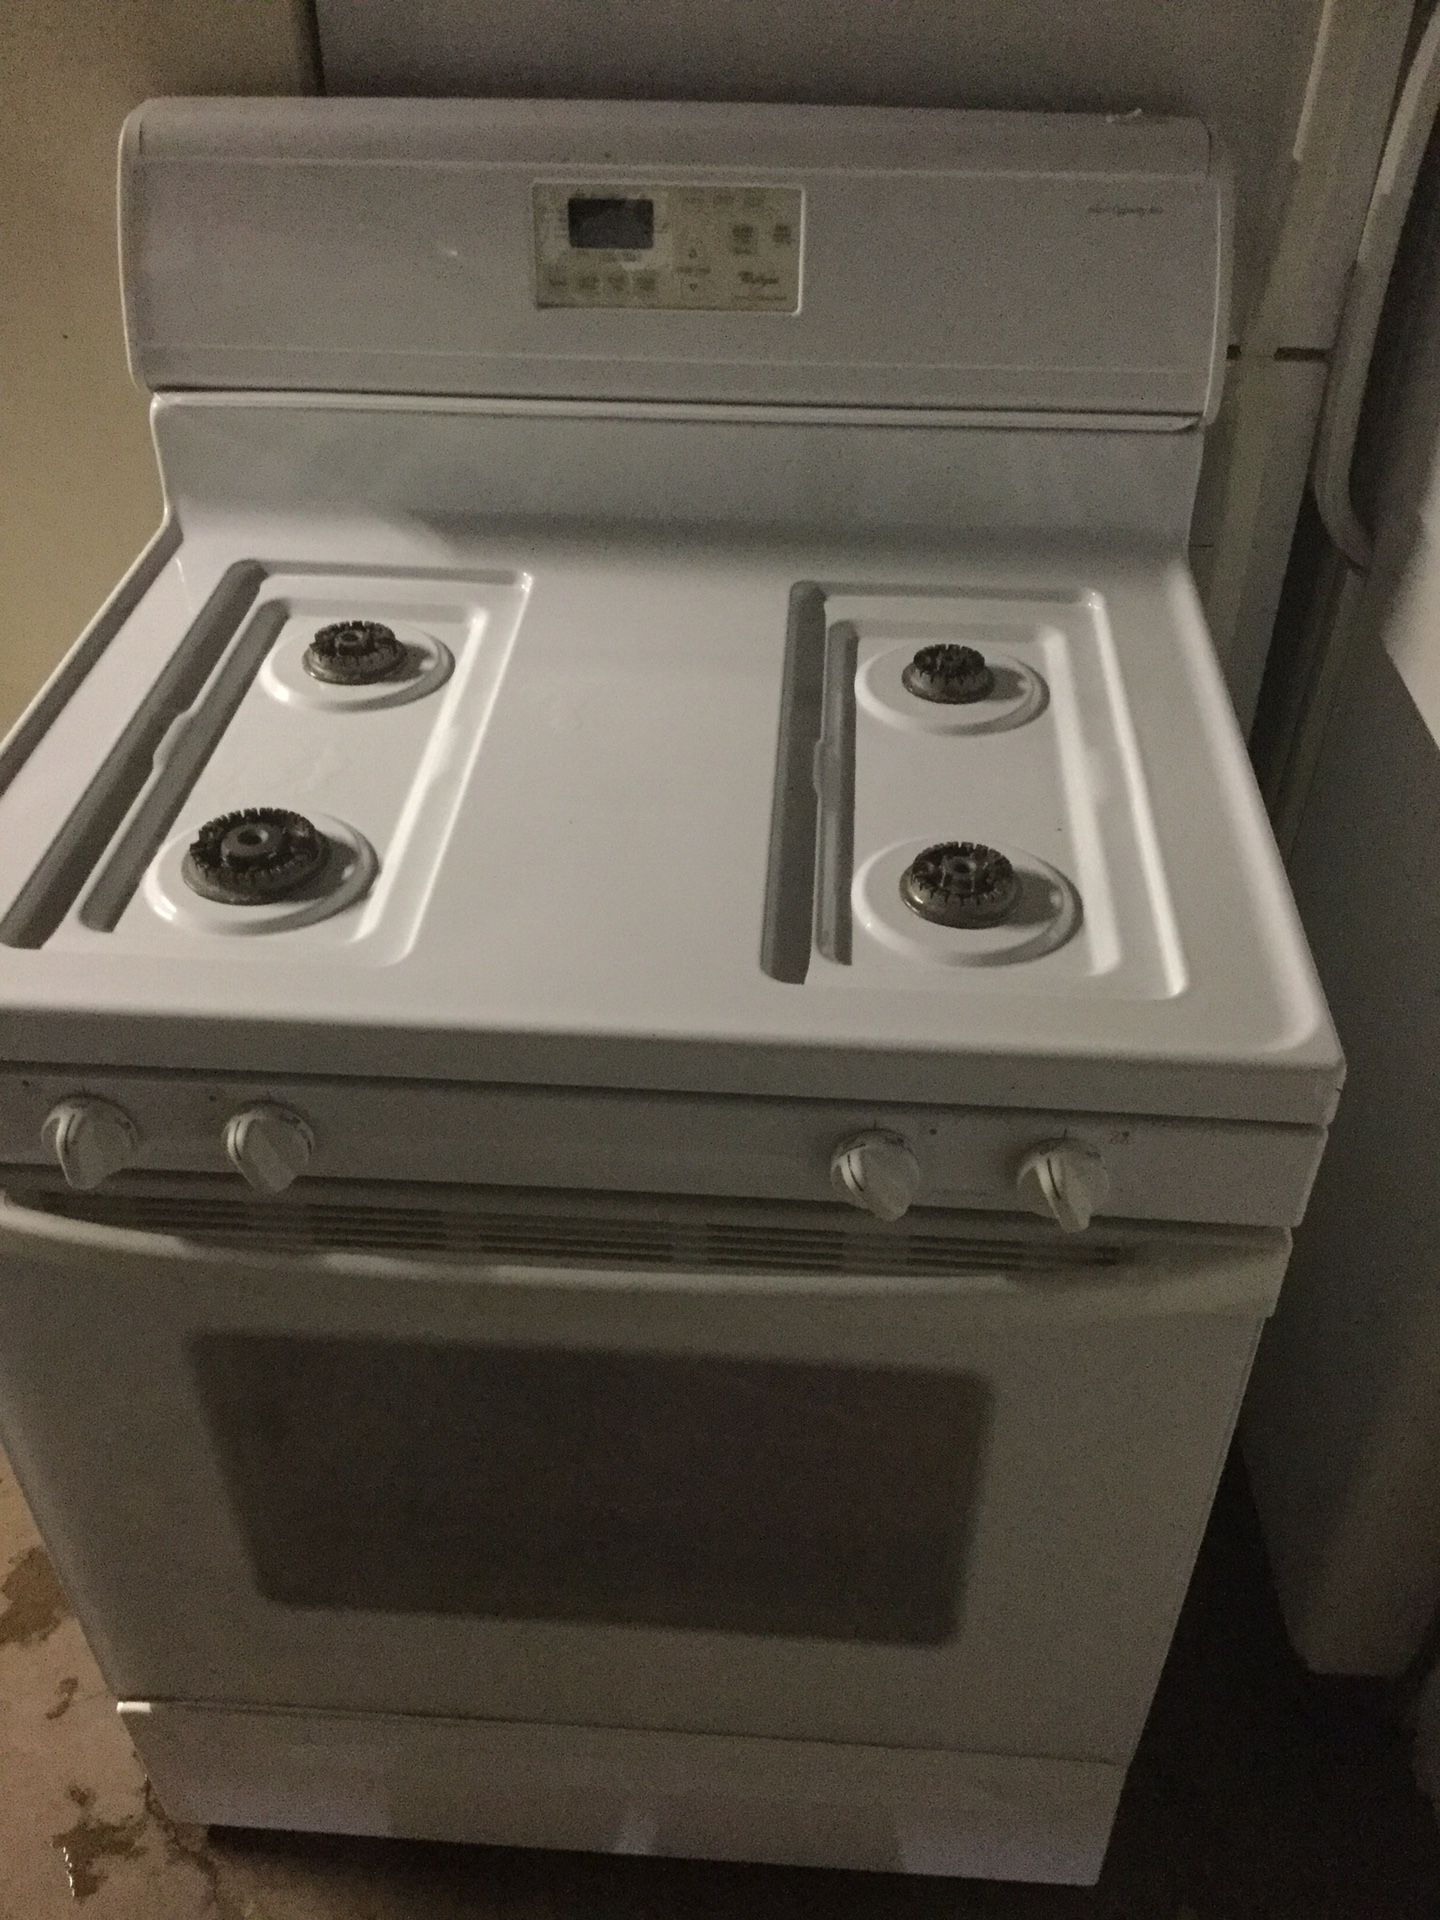 Whirlpool spectra gas stove/ all accessories included but not in photo/ one year warranty